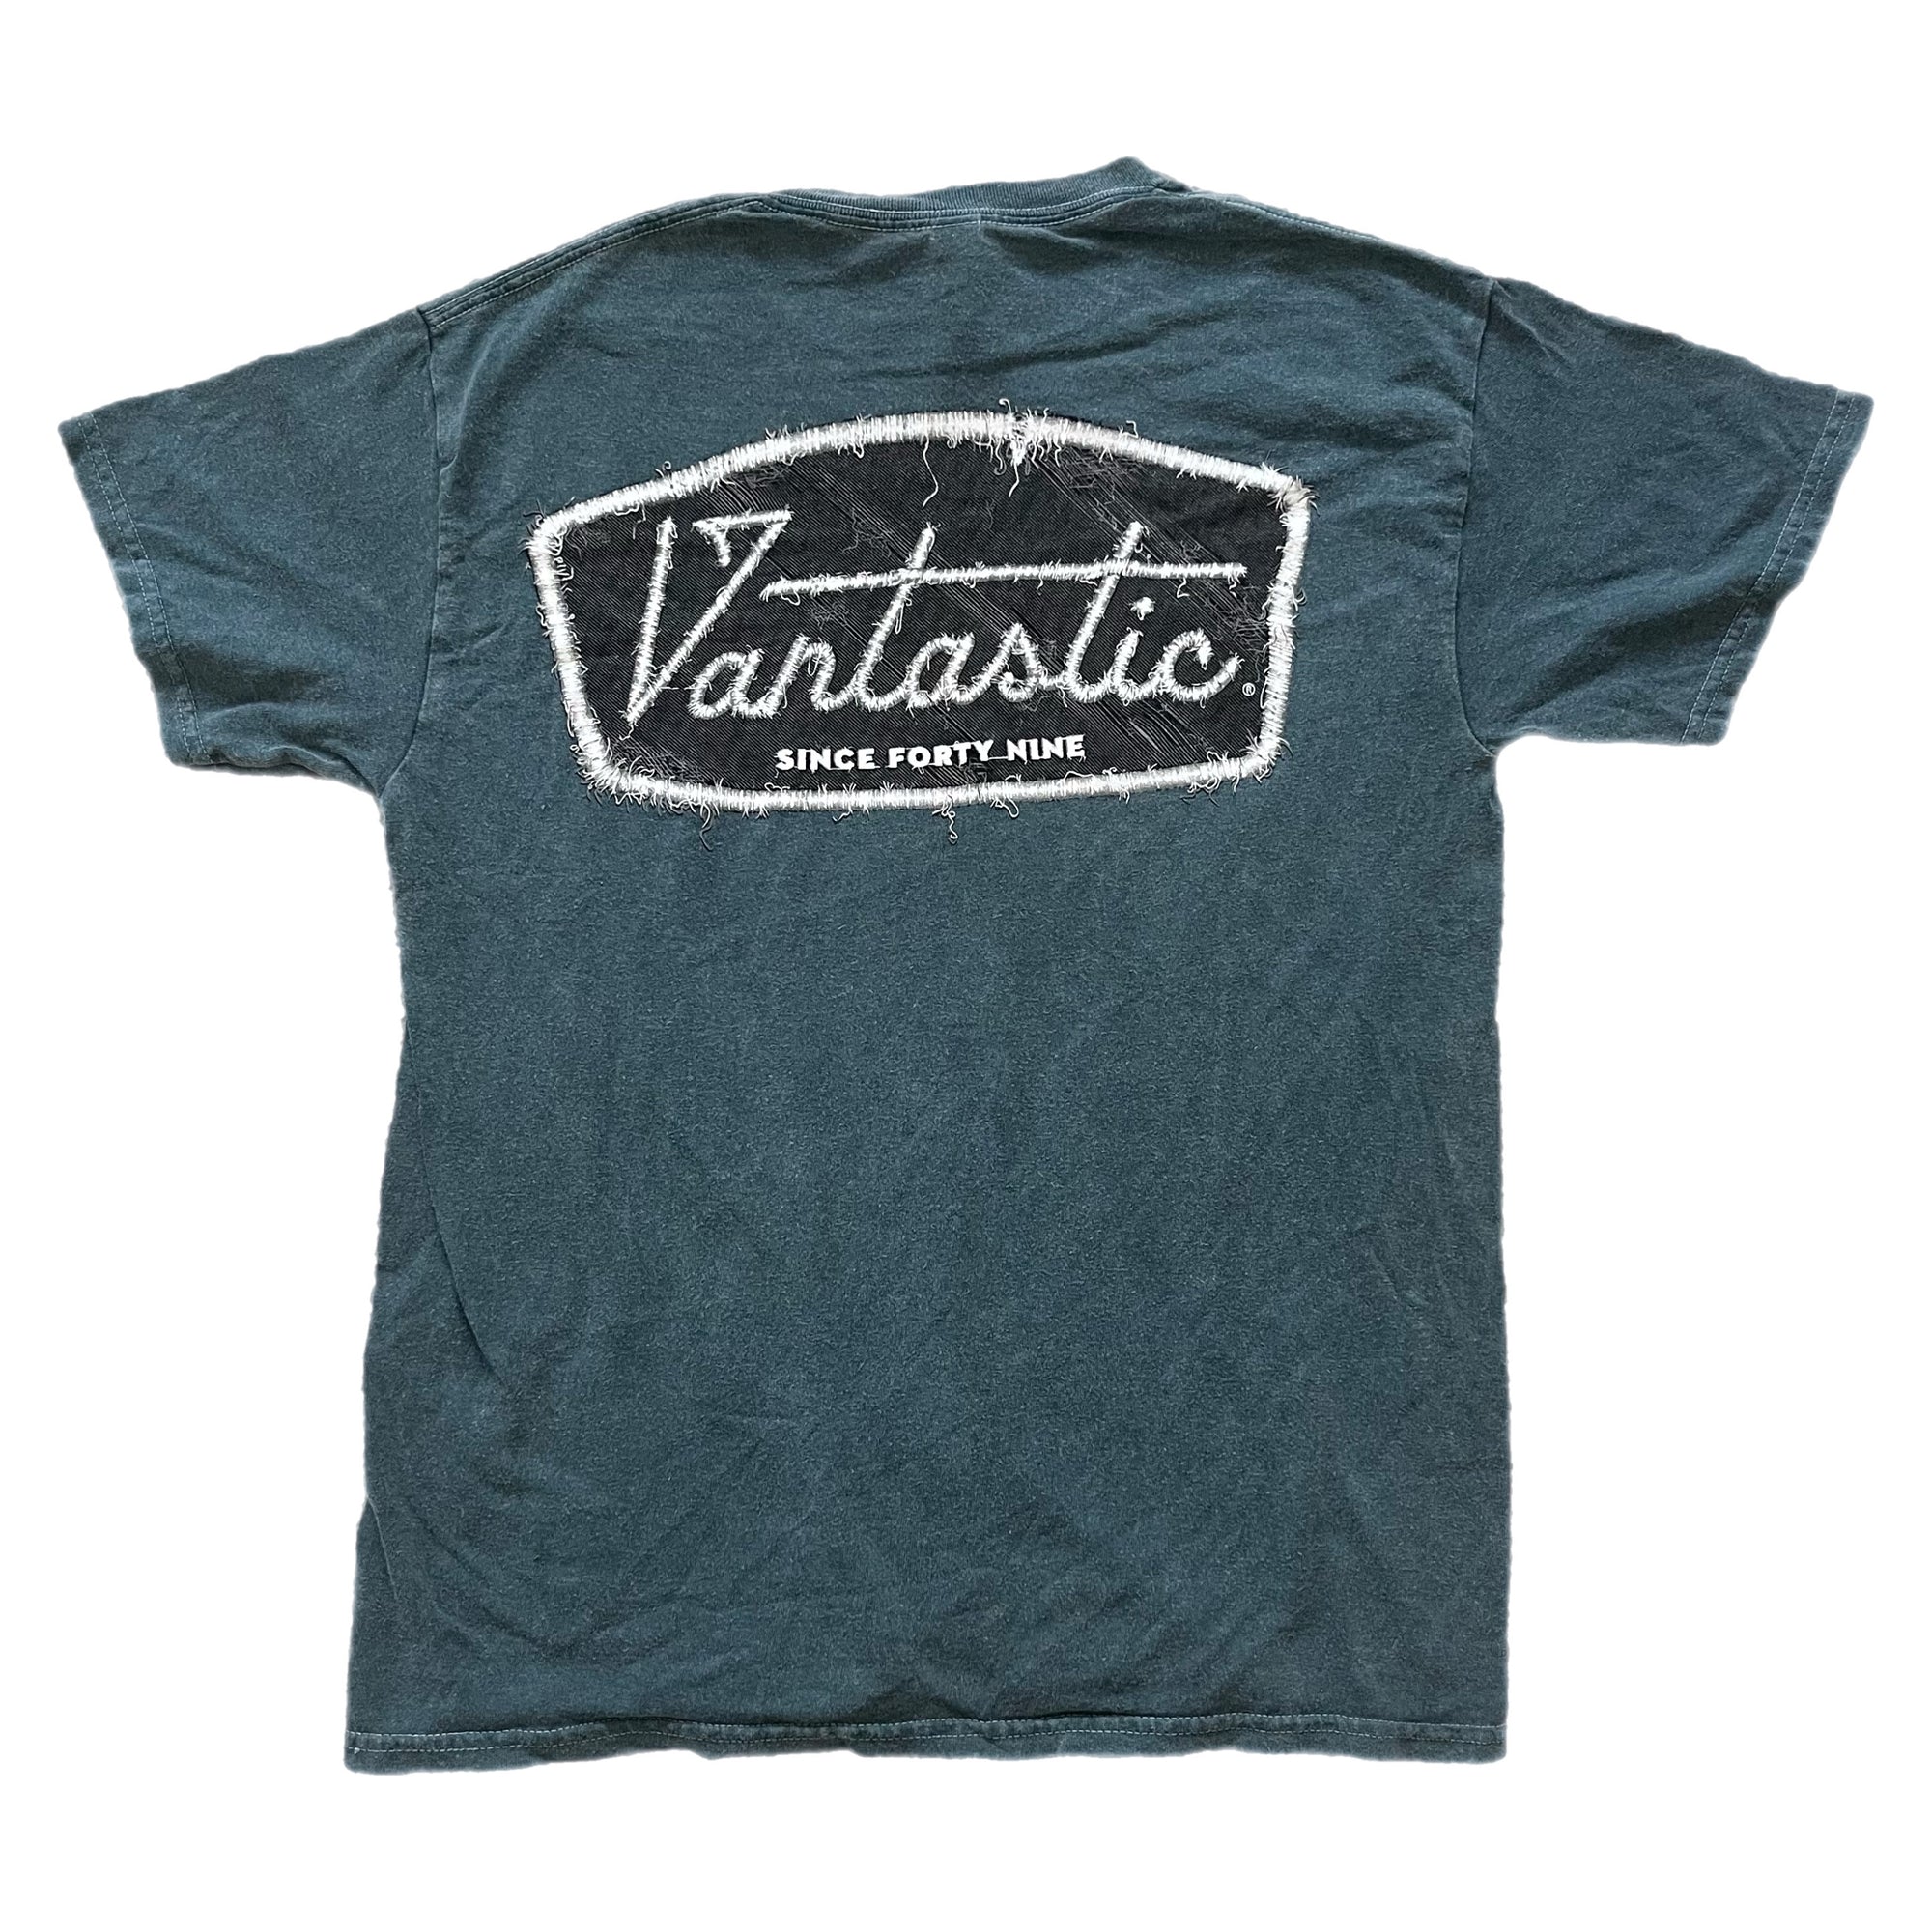 Vintage Deluxe T-shirt - Washed Teal